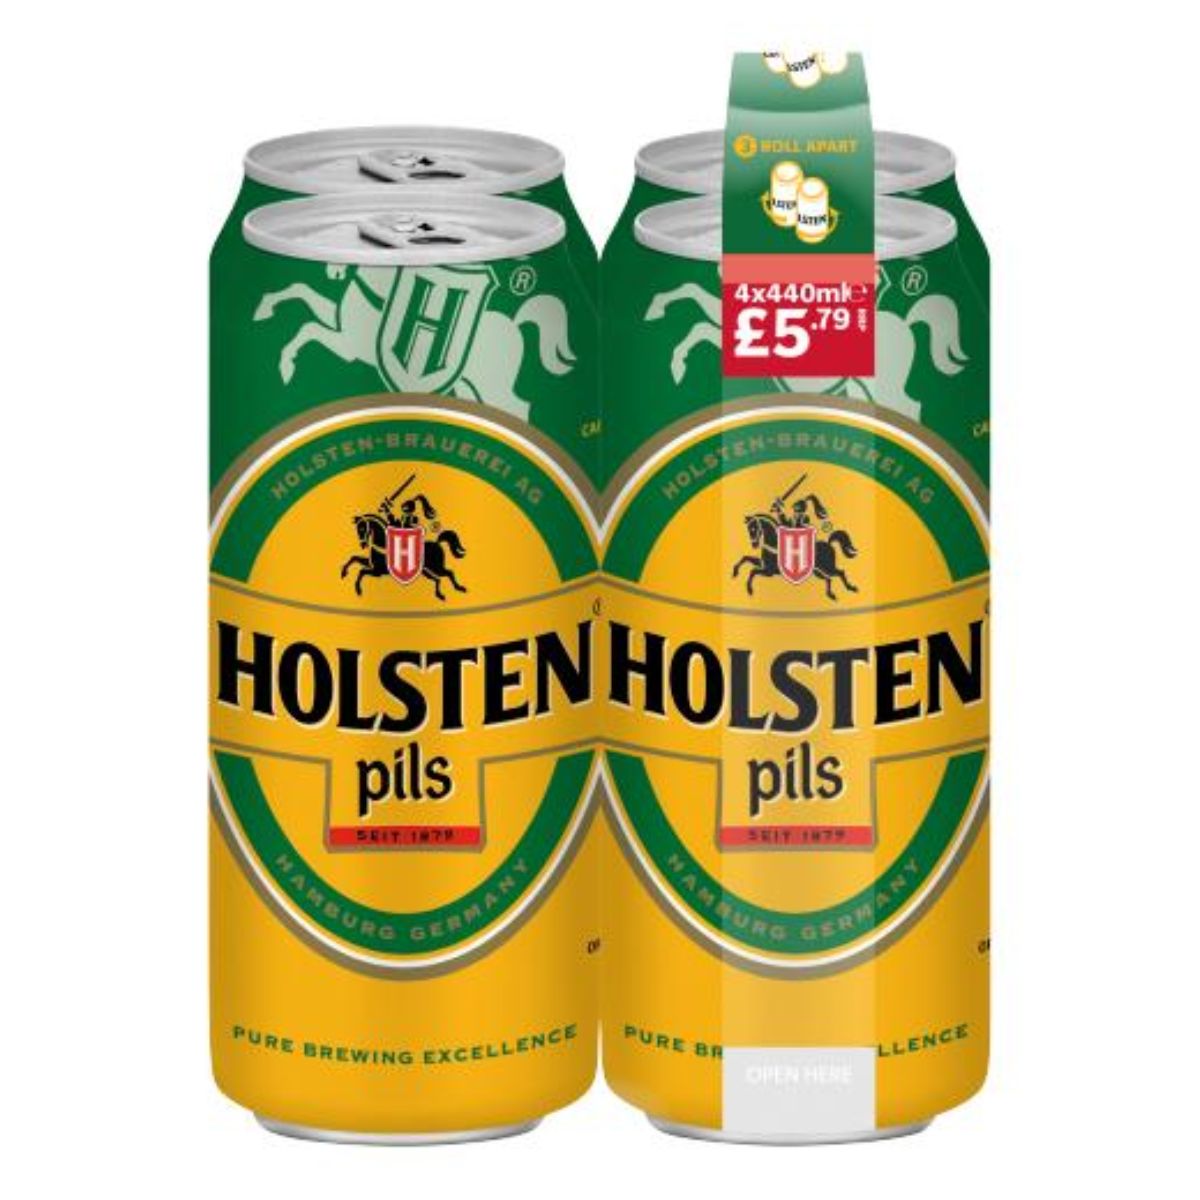 Three cans of Holsten Pils - Lager Beer (5% ABV) - 4 x 440ml on a white background.